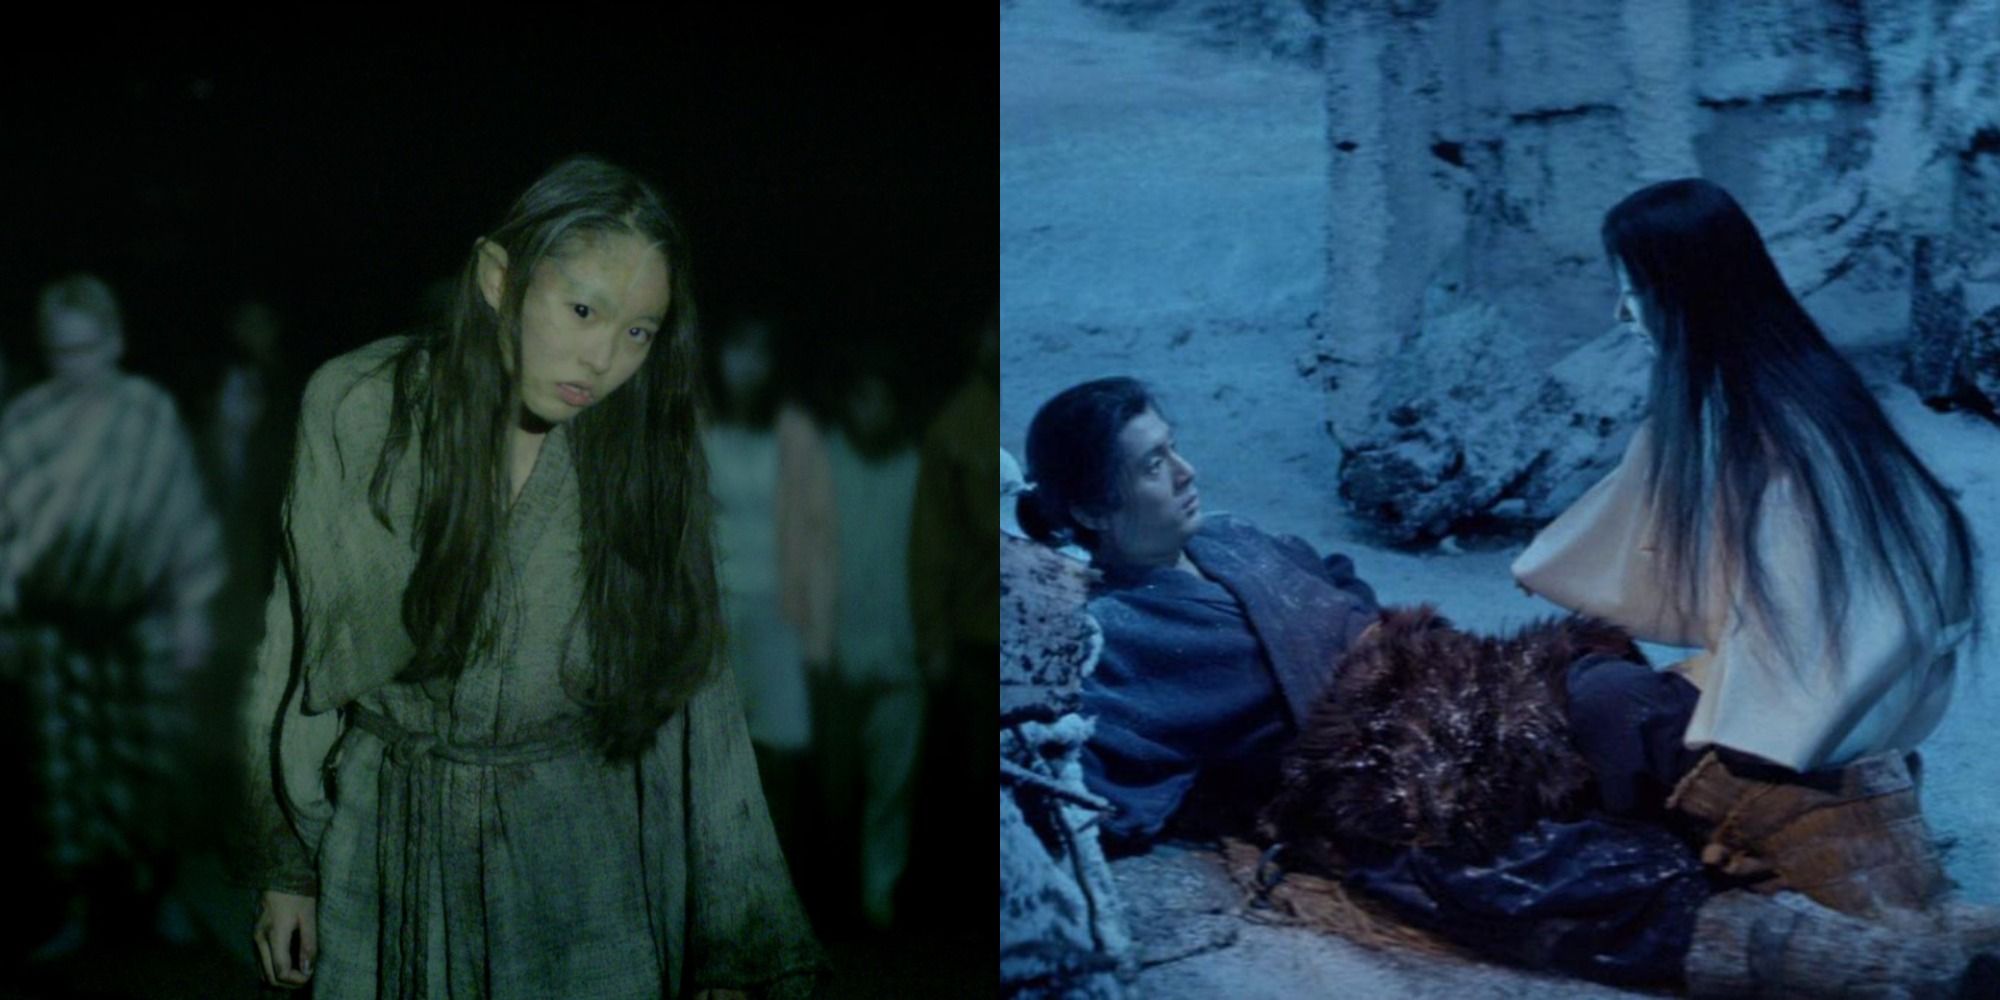 Onryō: the vengeful Japanese spirits that inspired 'The Ring' and 'The  Grudge'